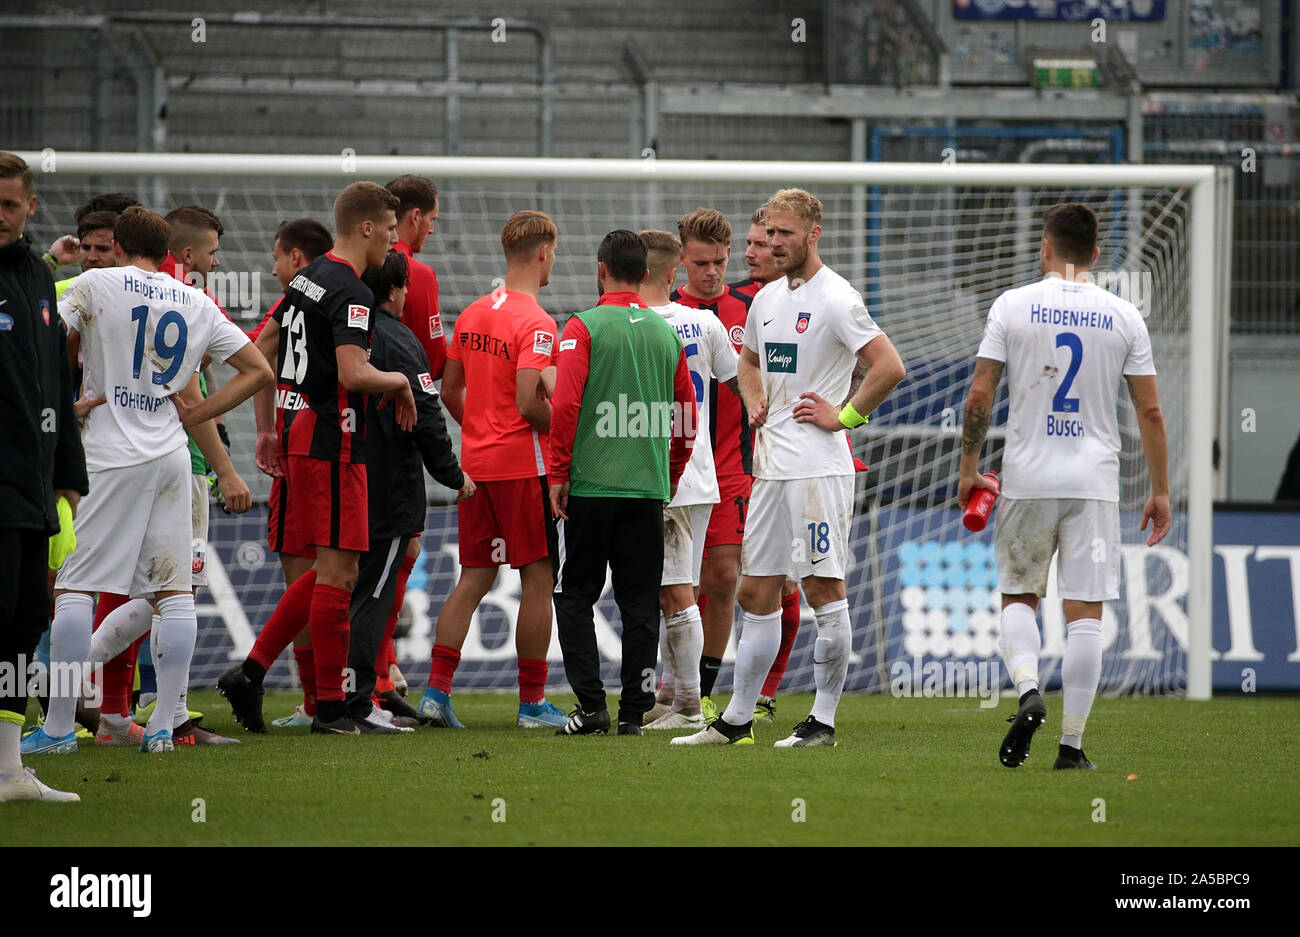 Wiesbaden, Germany. 19th Oct, 2019. Football Bundesliga 10th matchday, SV Wehen Wiesbaden - 1. FC Heidenheim on 19.10.2019 in the Brita-Arena - Wiesbaden (Hessen). A disappointed Sebastian Griesbeck from Heidenheim (2nd from right), Marnon Busch. Credit: Hasan Bratic/dpa - IMPORTANT NOTE: In accordance with the requirements of the DFL Deutsche Fußball Liga or the DFB Deutscher Fußball-Bund, it is prohibited to use or have used photographs taken in the stadium and/or the match in the form of sequence images and/or video-like photo sequences./dpa/Alamy Live News Stock Photo